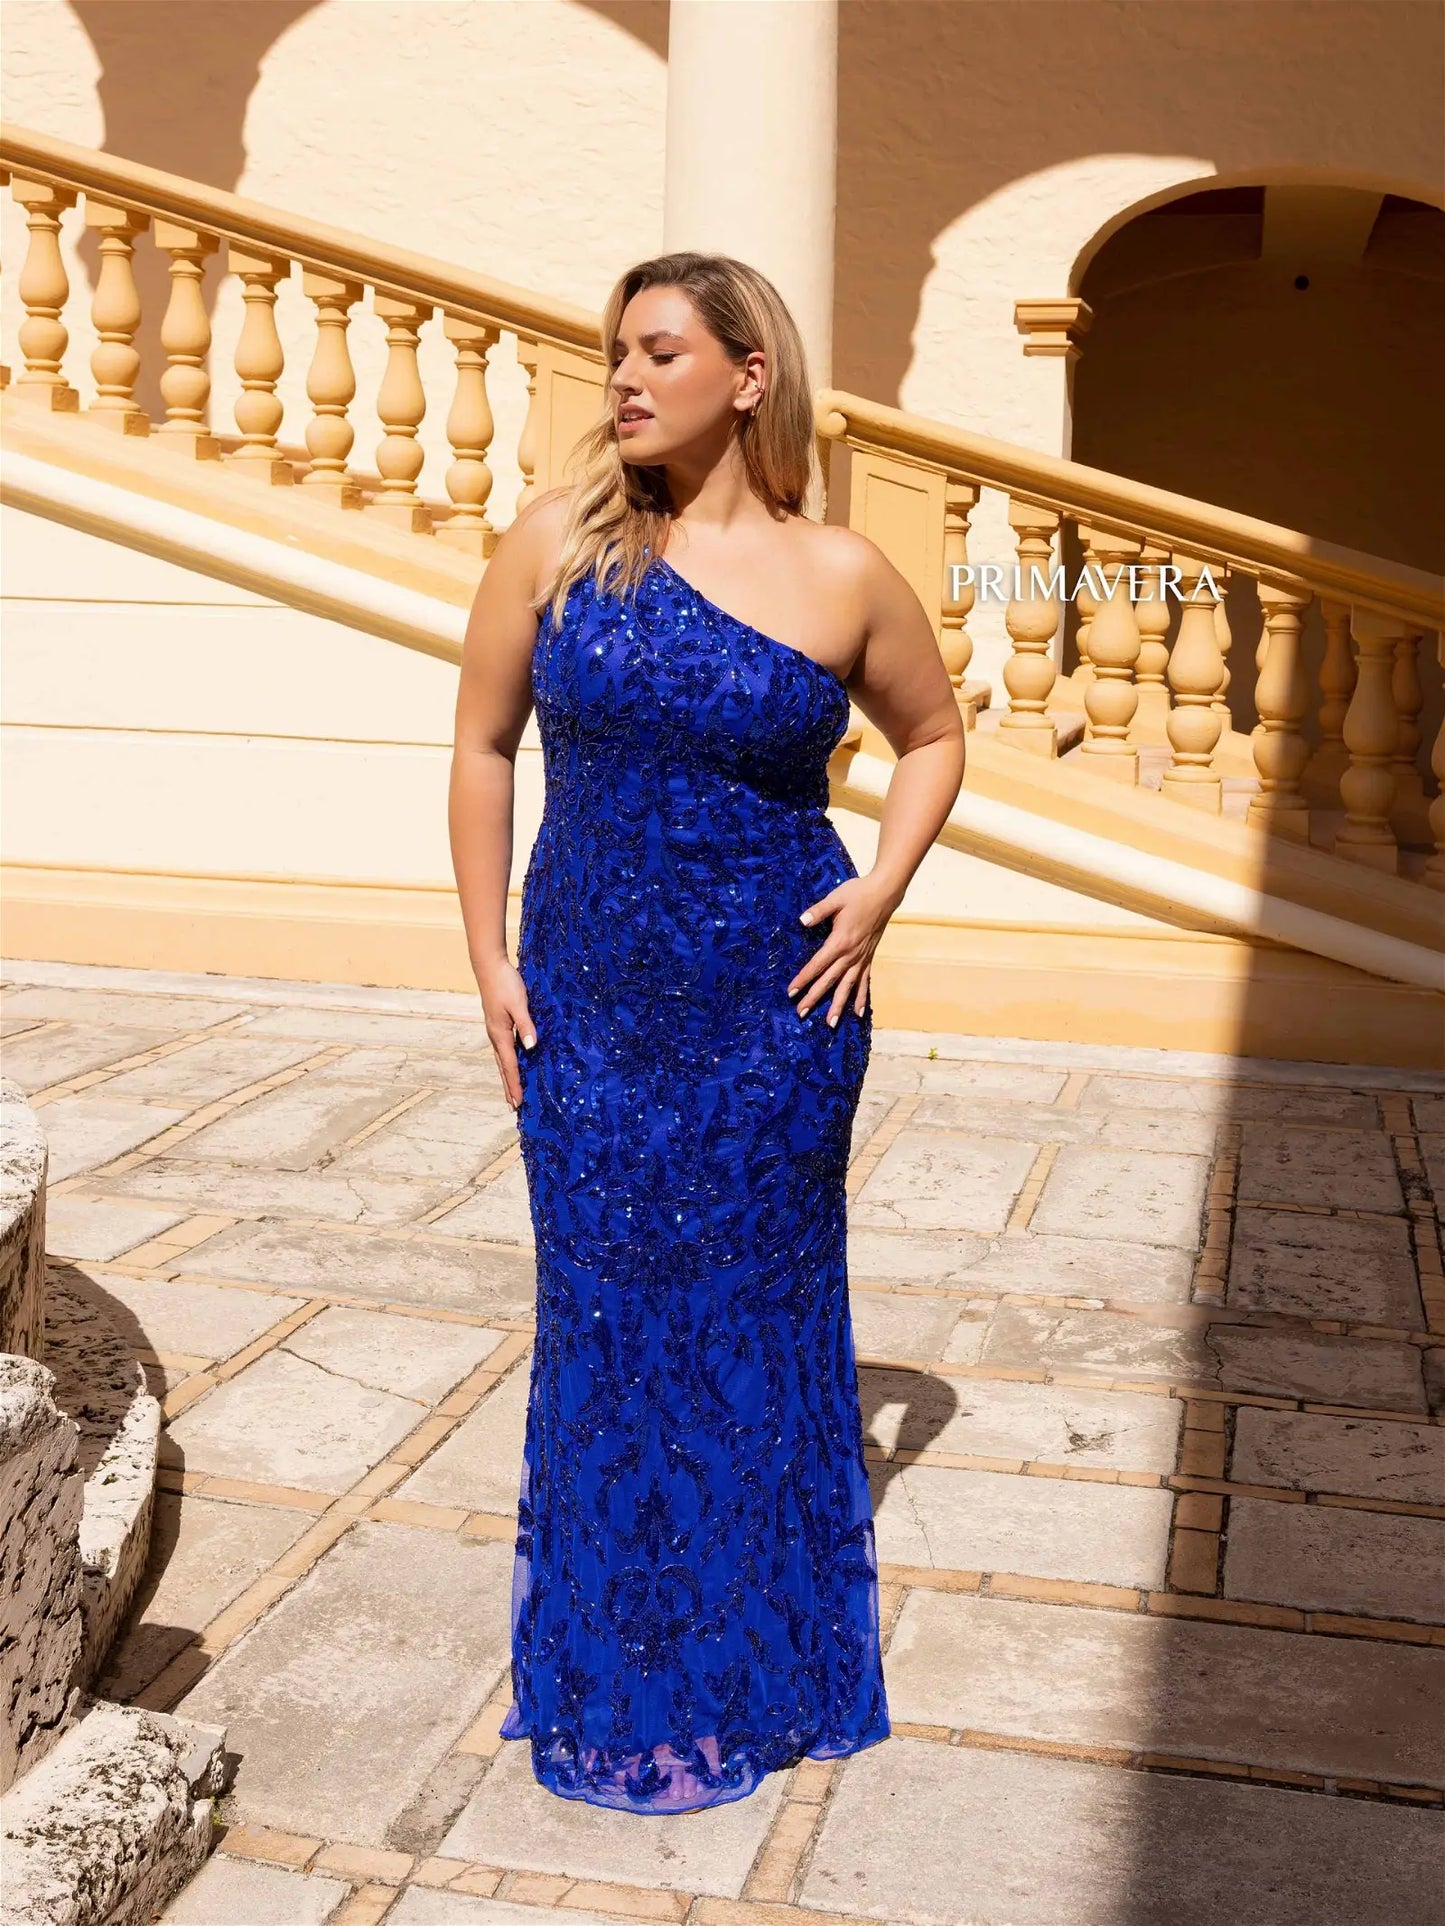 This Primavera Couture 14049 Long Prom Dress exudes glamour and sophistication. Designed with sequins for a touch of sparkle, this plus size formal gown hugs your curves in all the right places. Elevate your prom or formal event with this elegantly fitted dress.